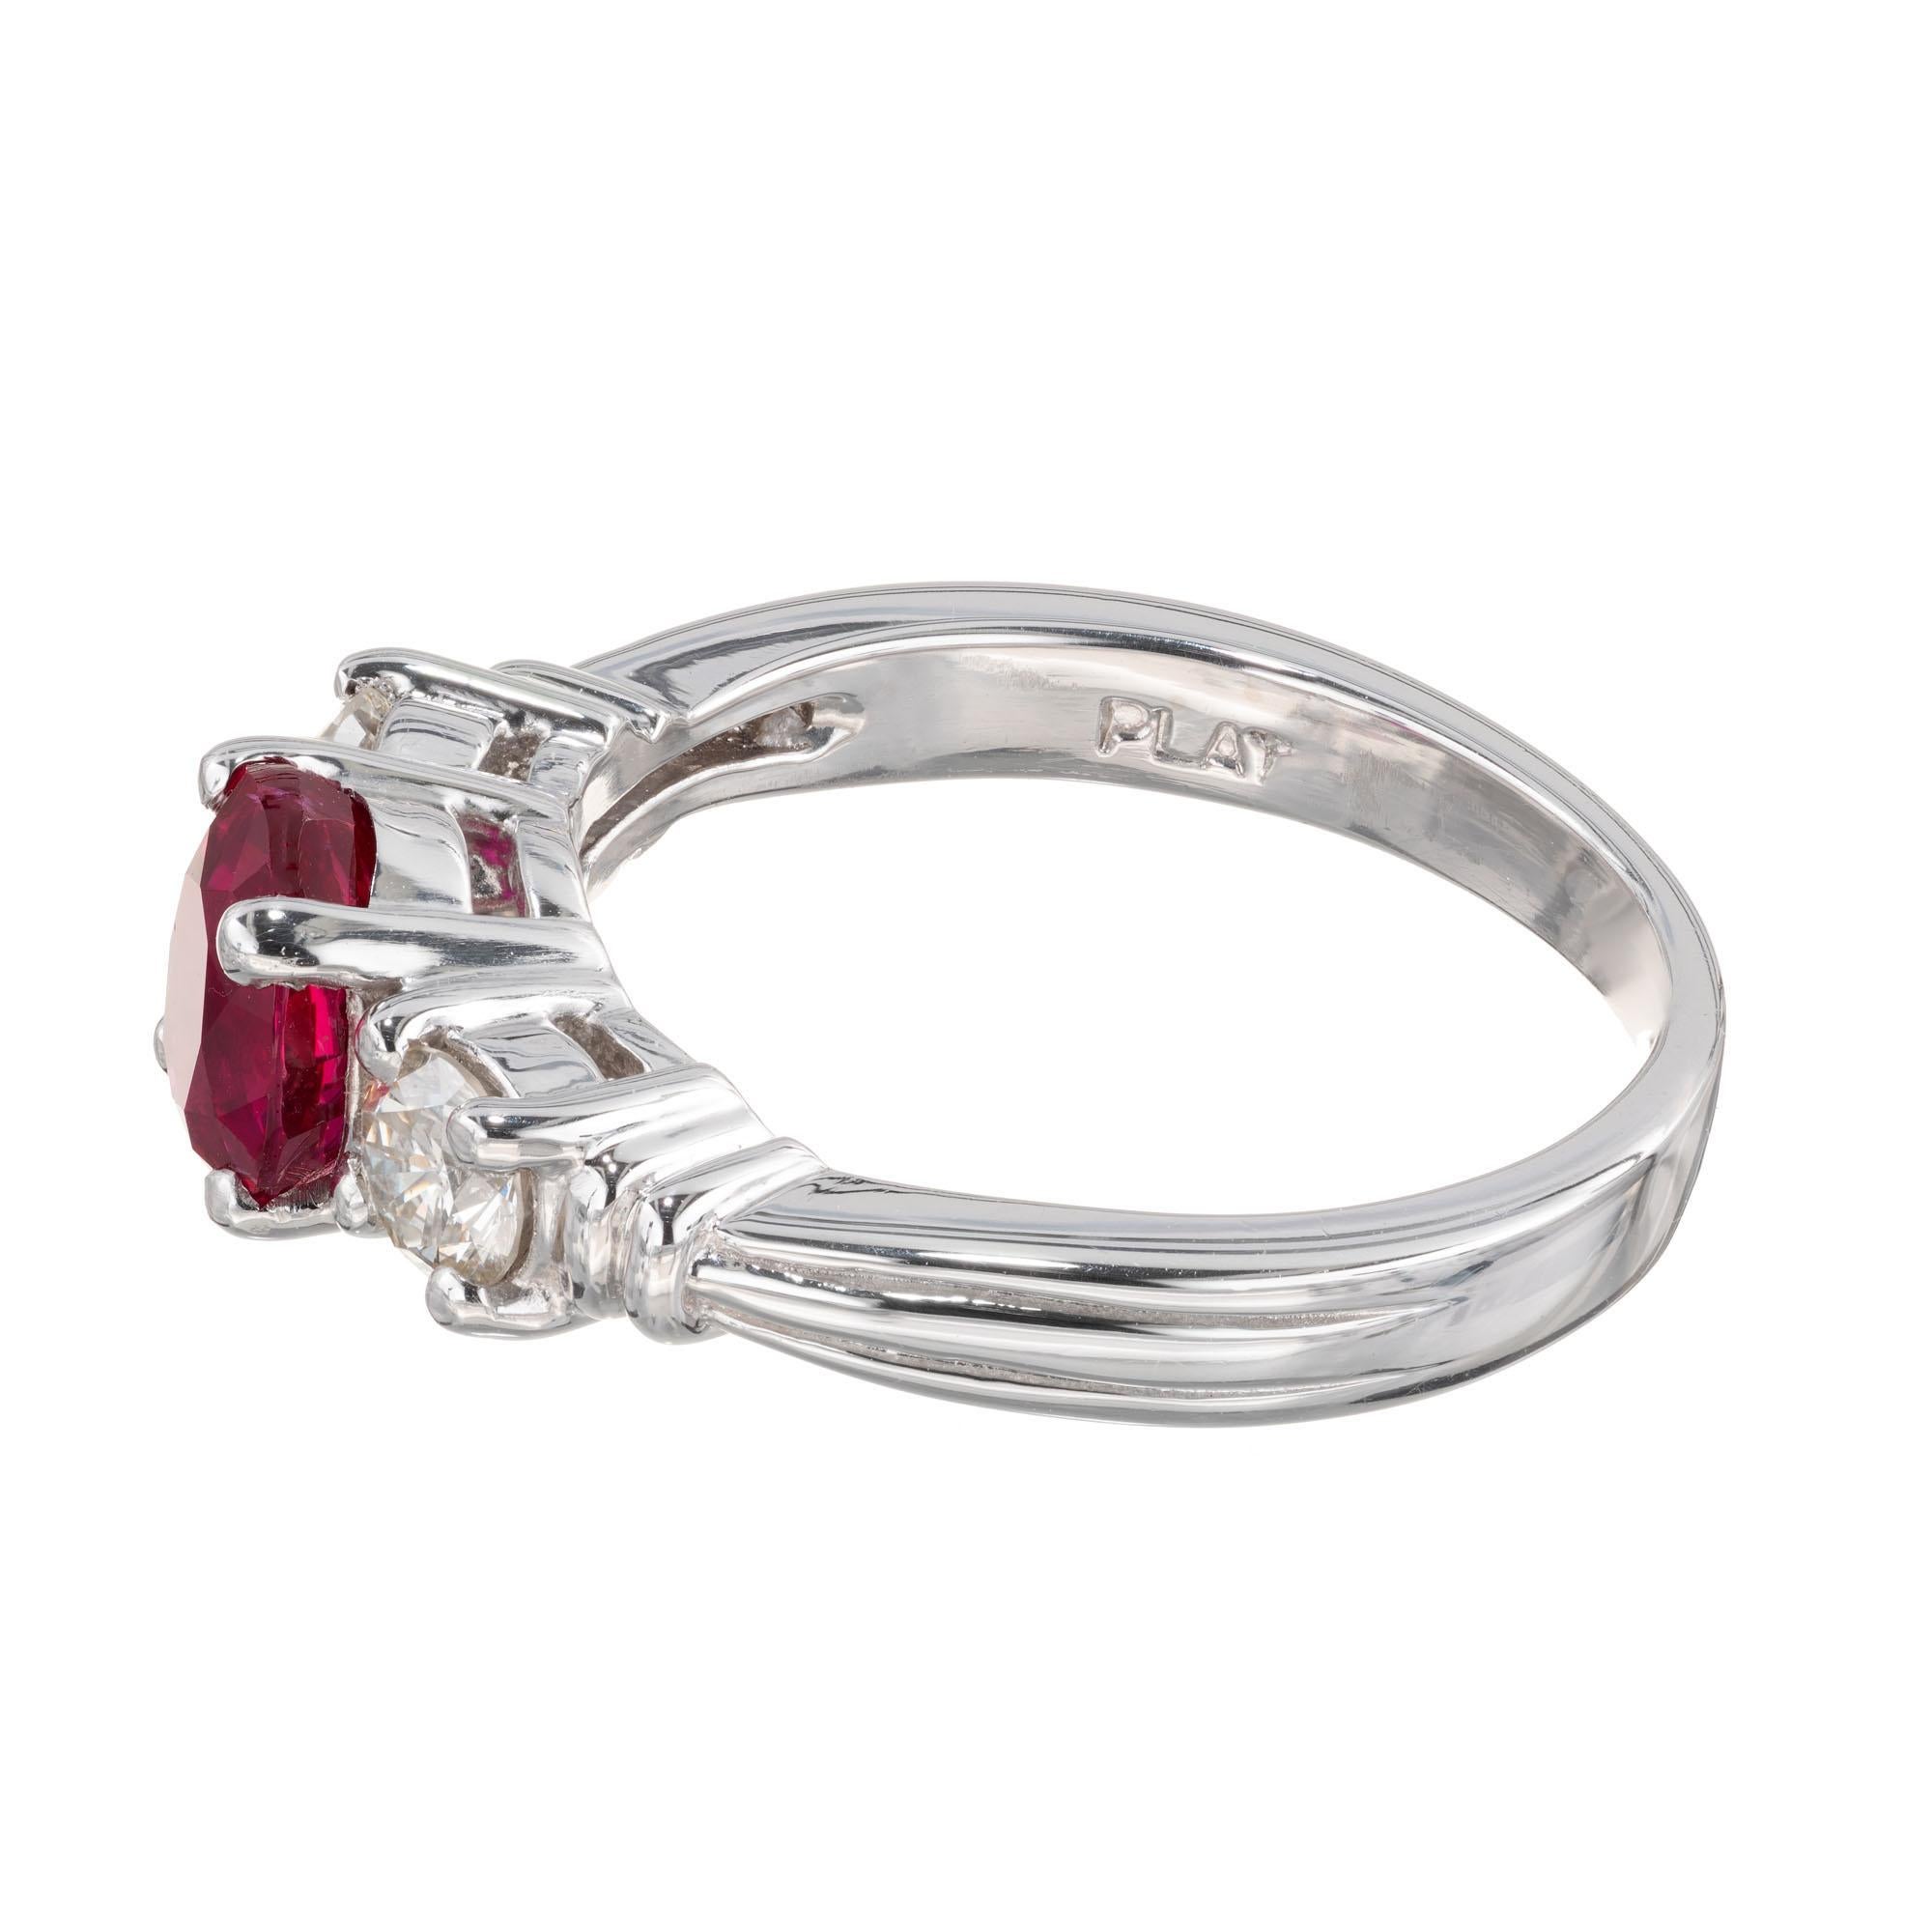 Oval Cut Peter Suchy GIA Certified 1.57 Carat Ruby Diamond Platinum Engagement Ring For Sale